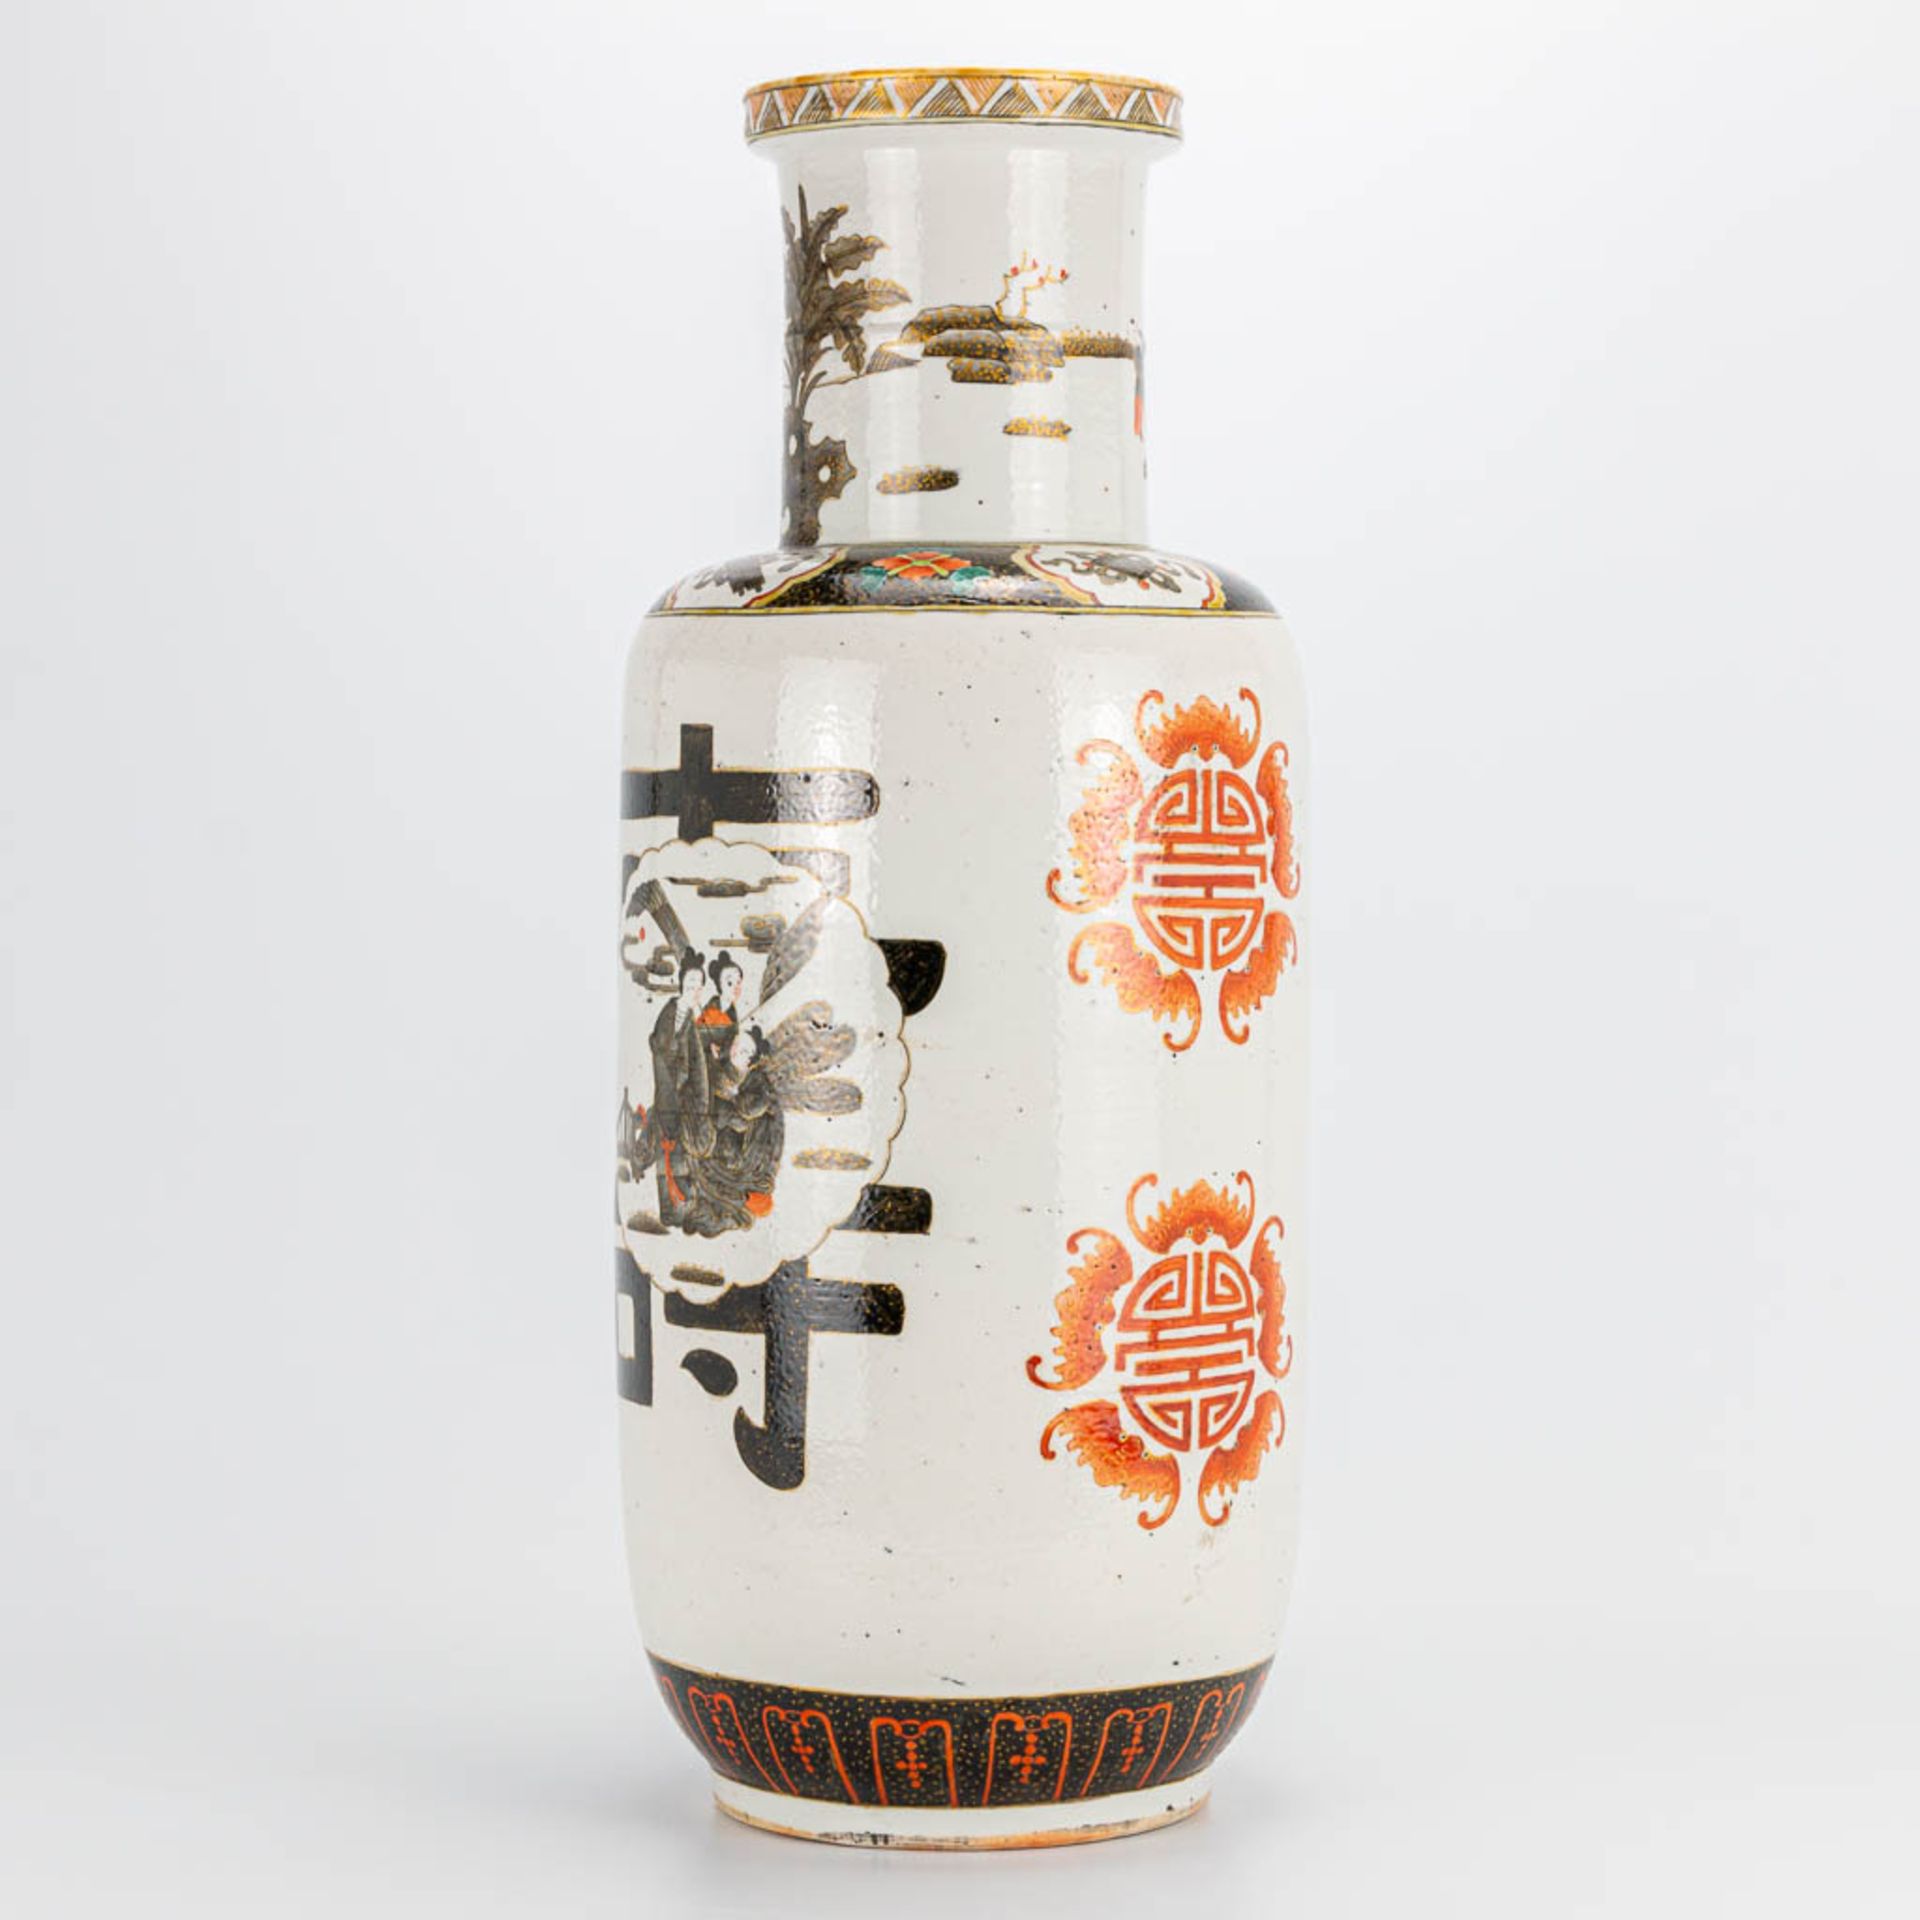 A Chinese vase with decor of wise men and calligraphic texts. 19th/20th century. (54 x 21 cm) - Image 7 of 21